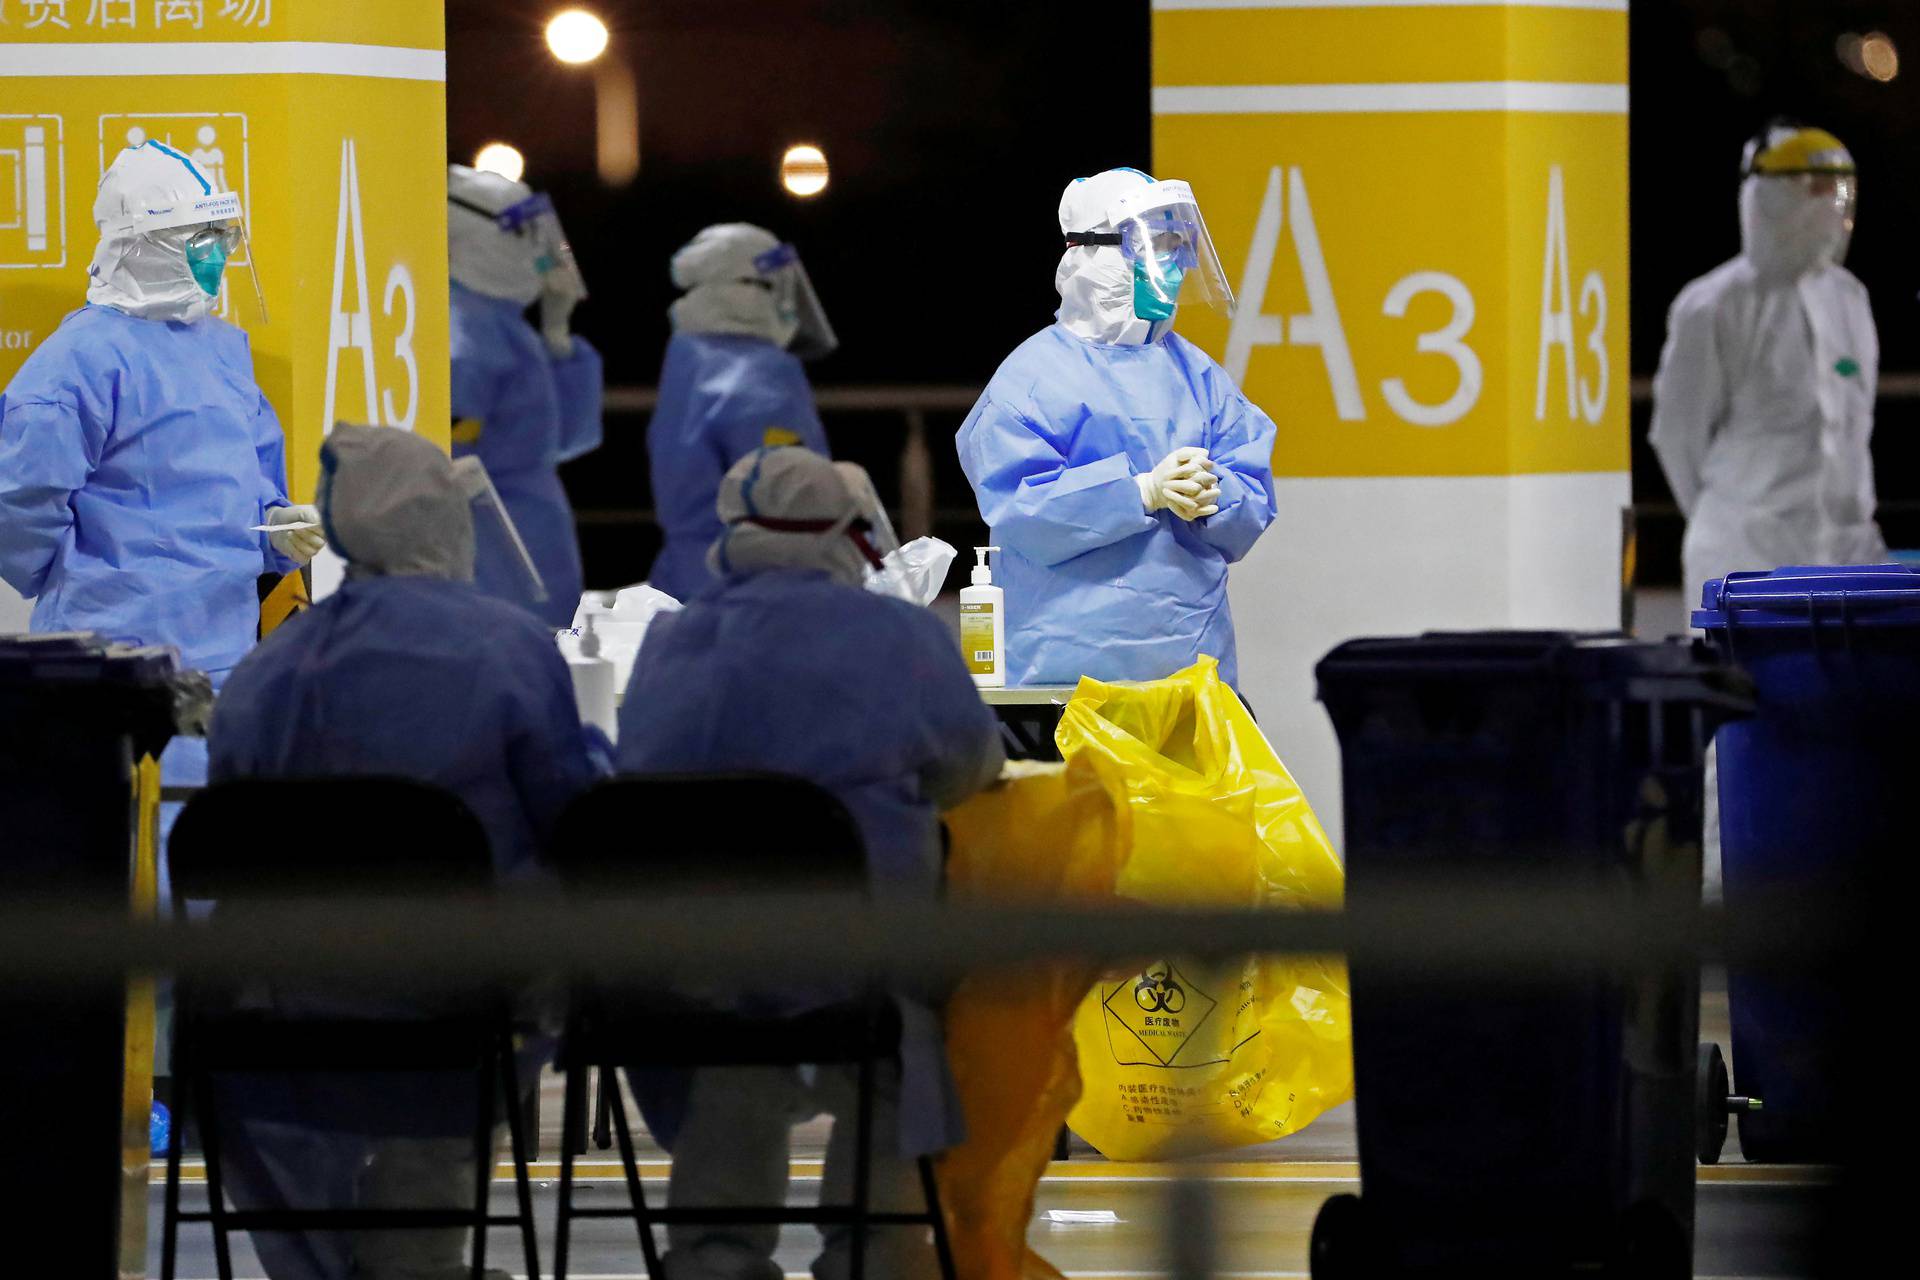 Workers in protective suits are seen at a makeshift nucleic acid testing site at Shanghai Pudong International Airport